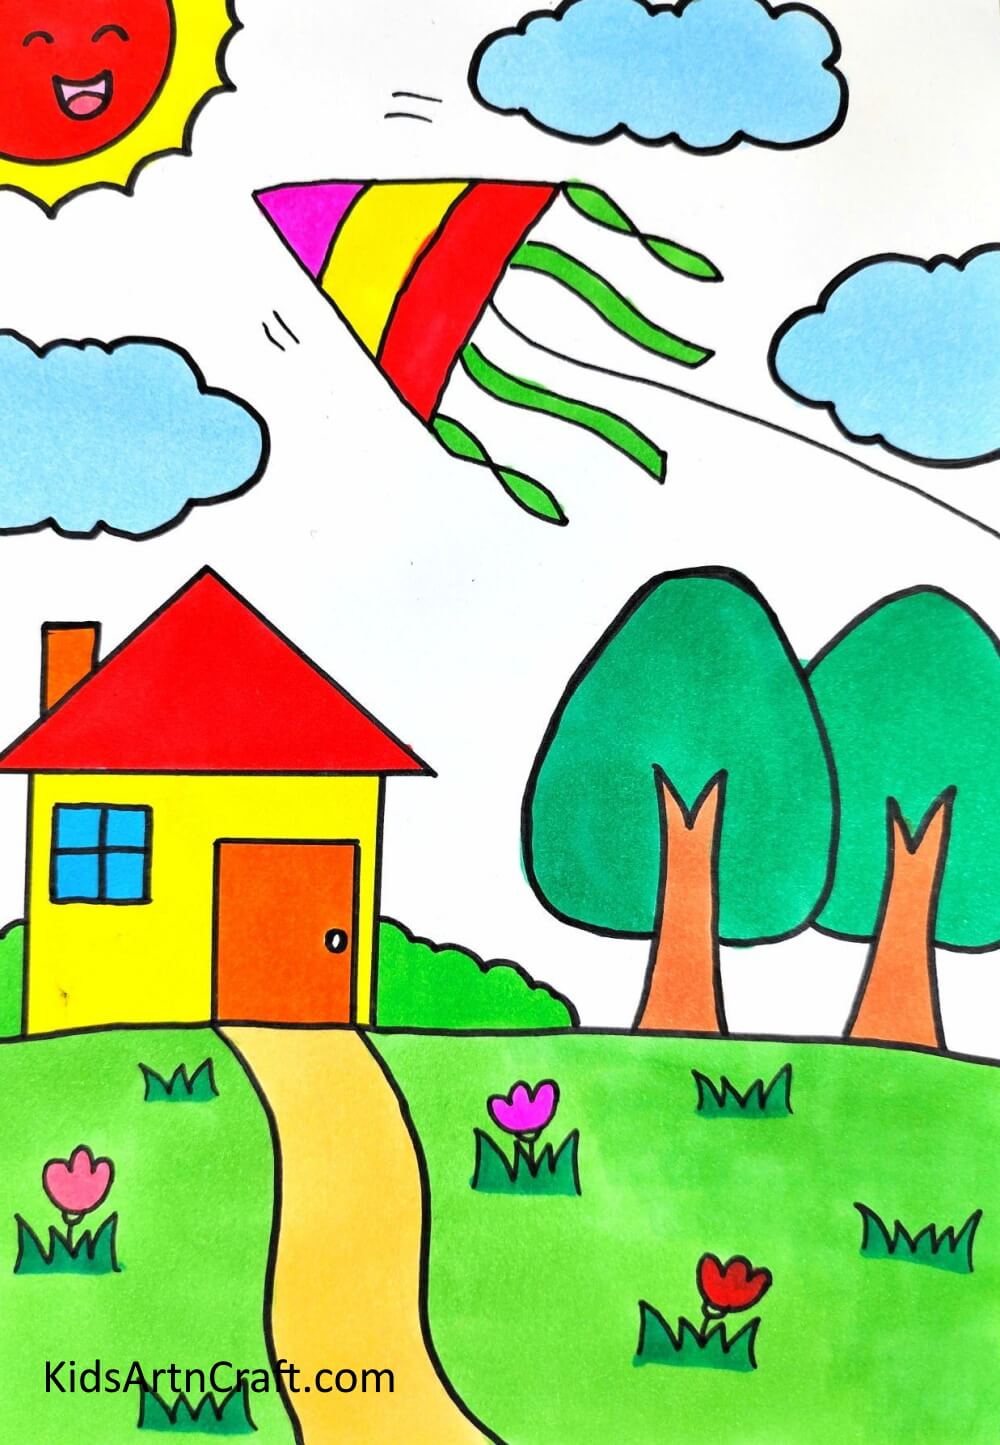 Easy To Draw Scenery picture For Kids